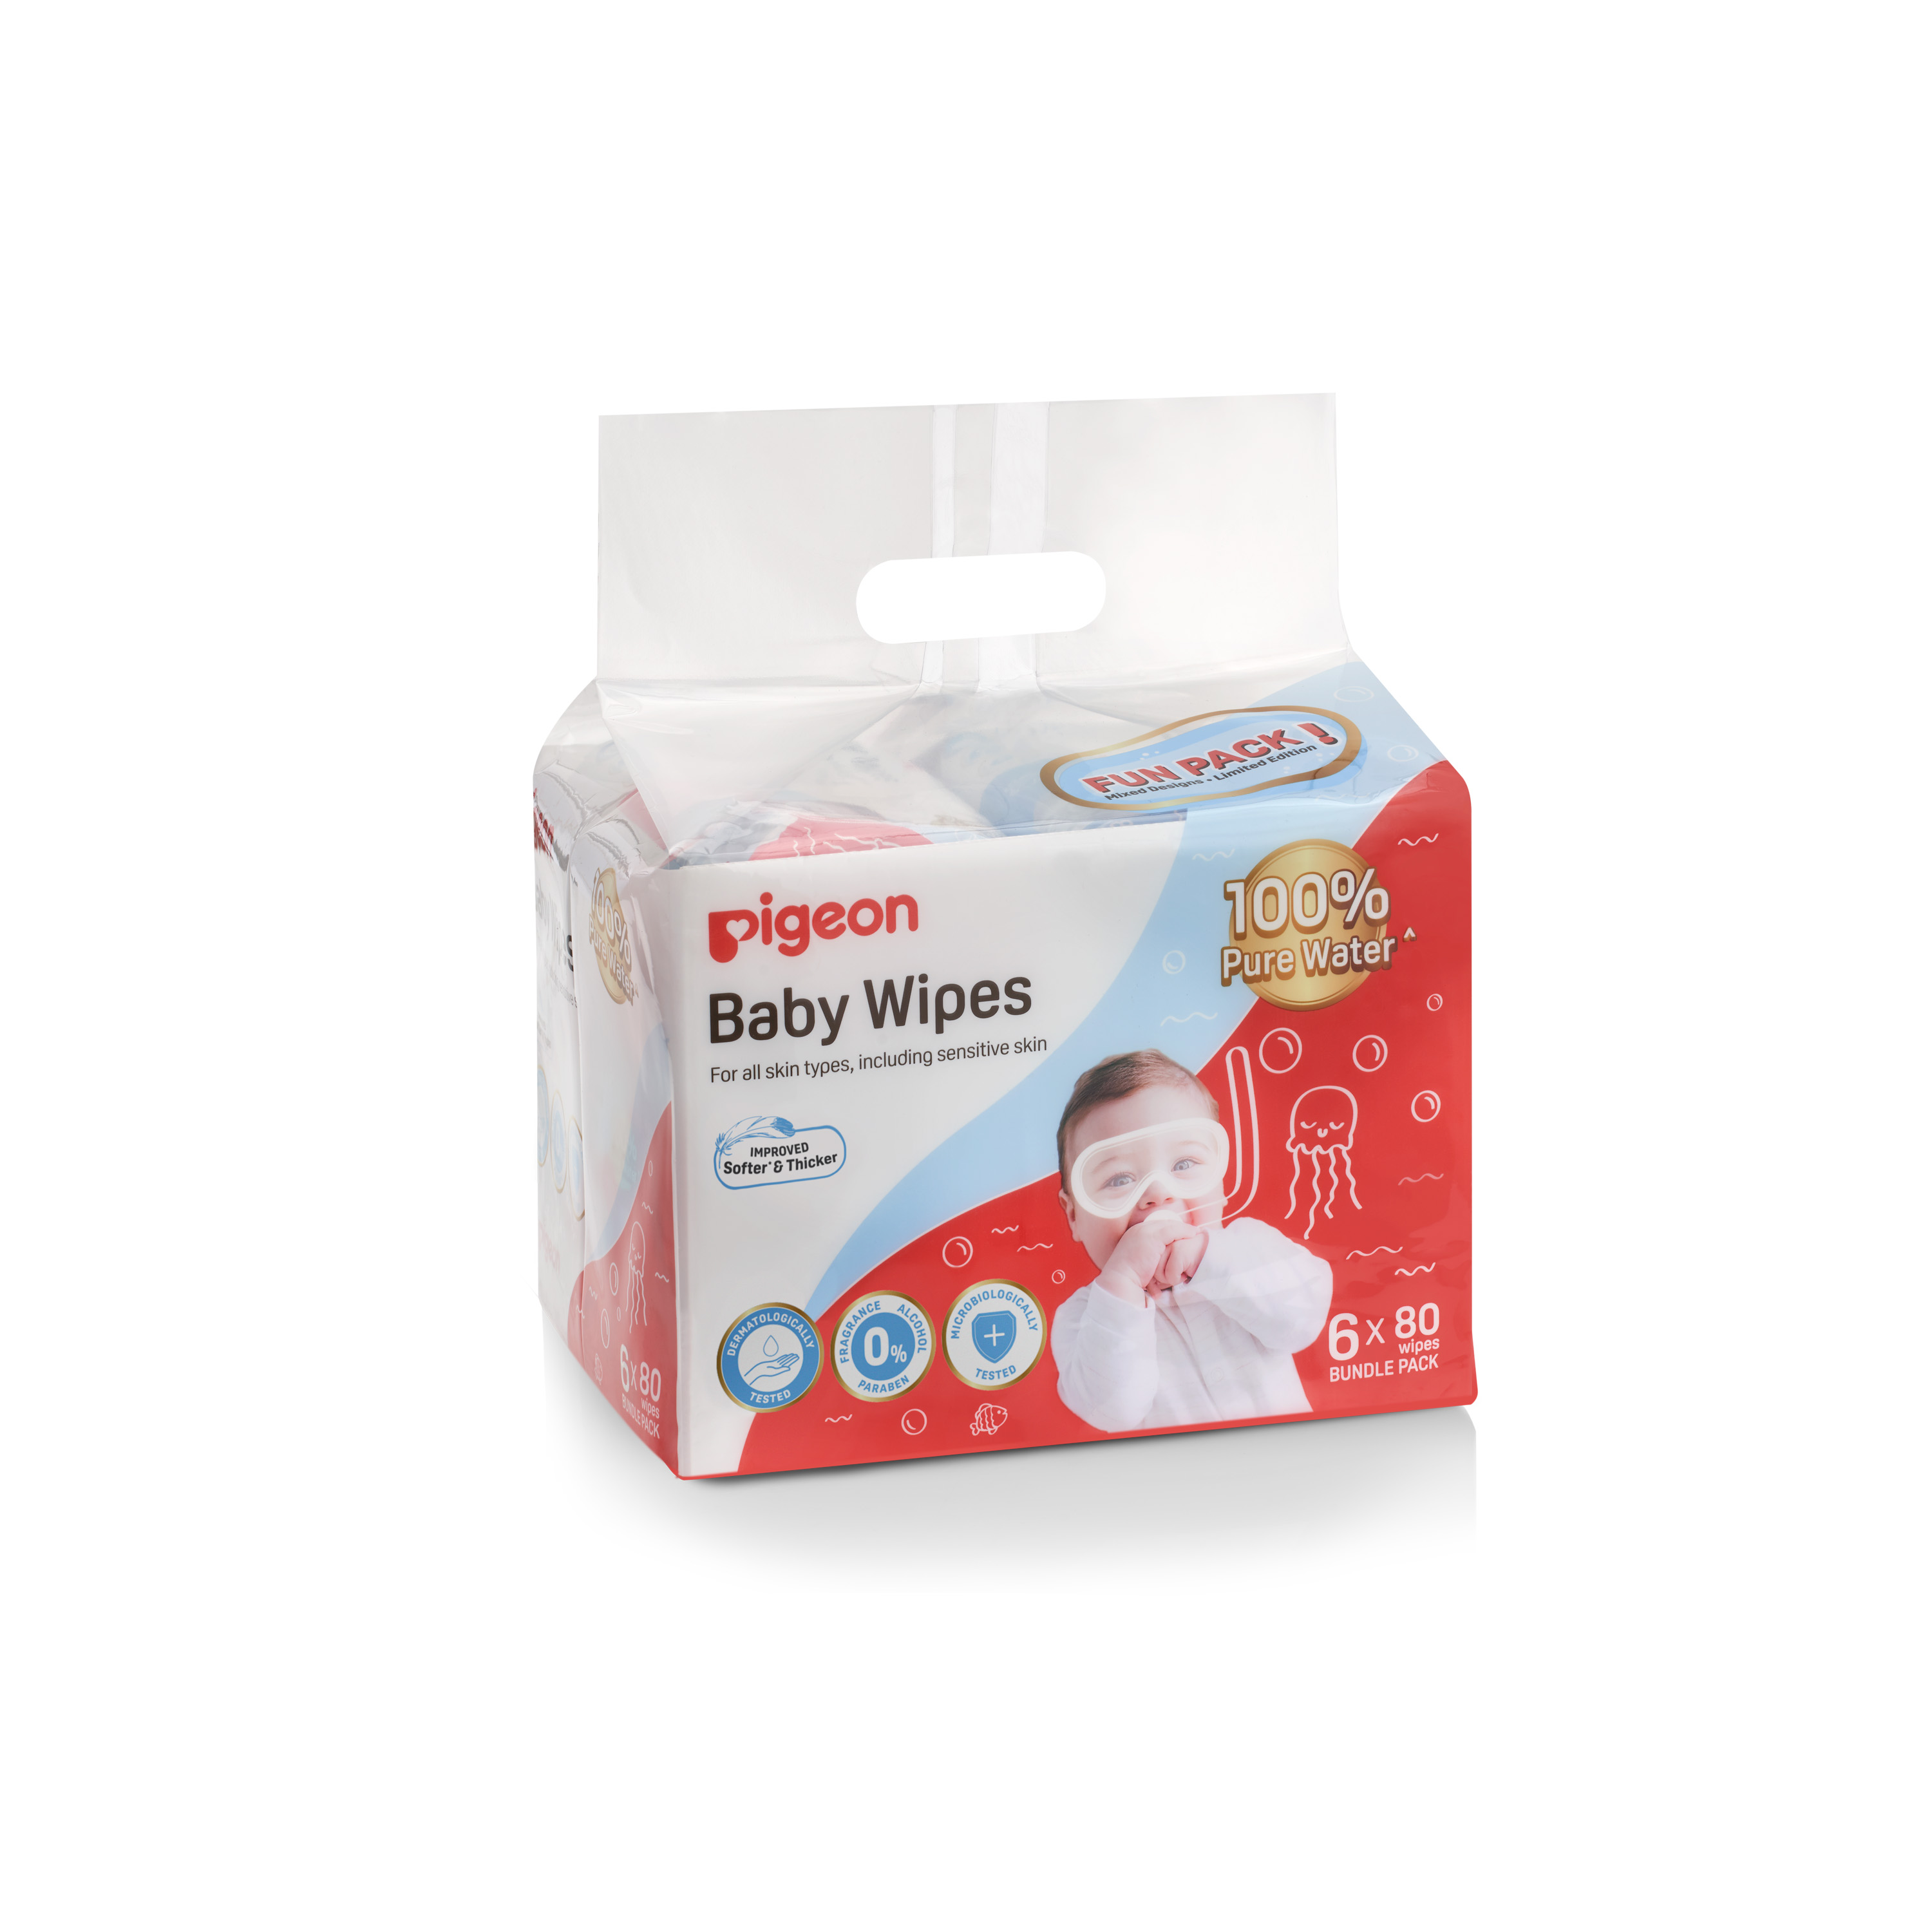 Pigeon Pigeon Baby Wipes 80 Sheets 100% Pure Water 6 in 1 (Bundle of 4) (PG-79496SC)